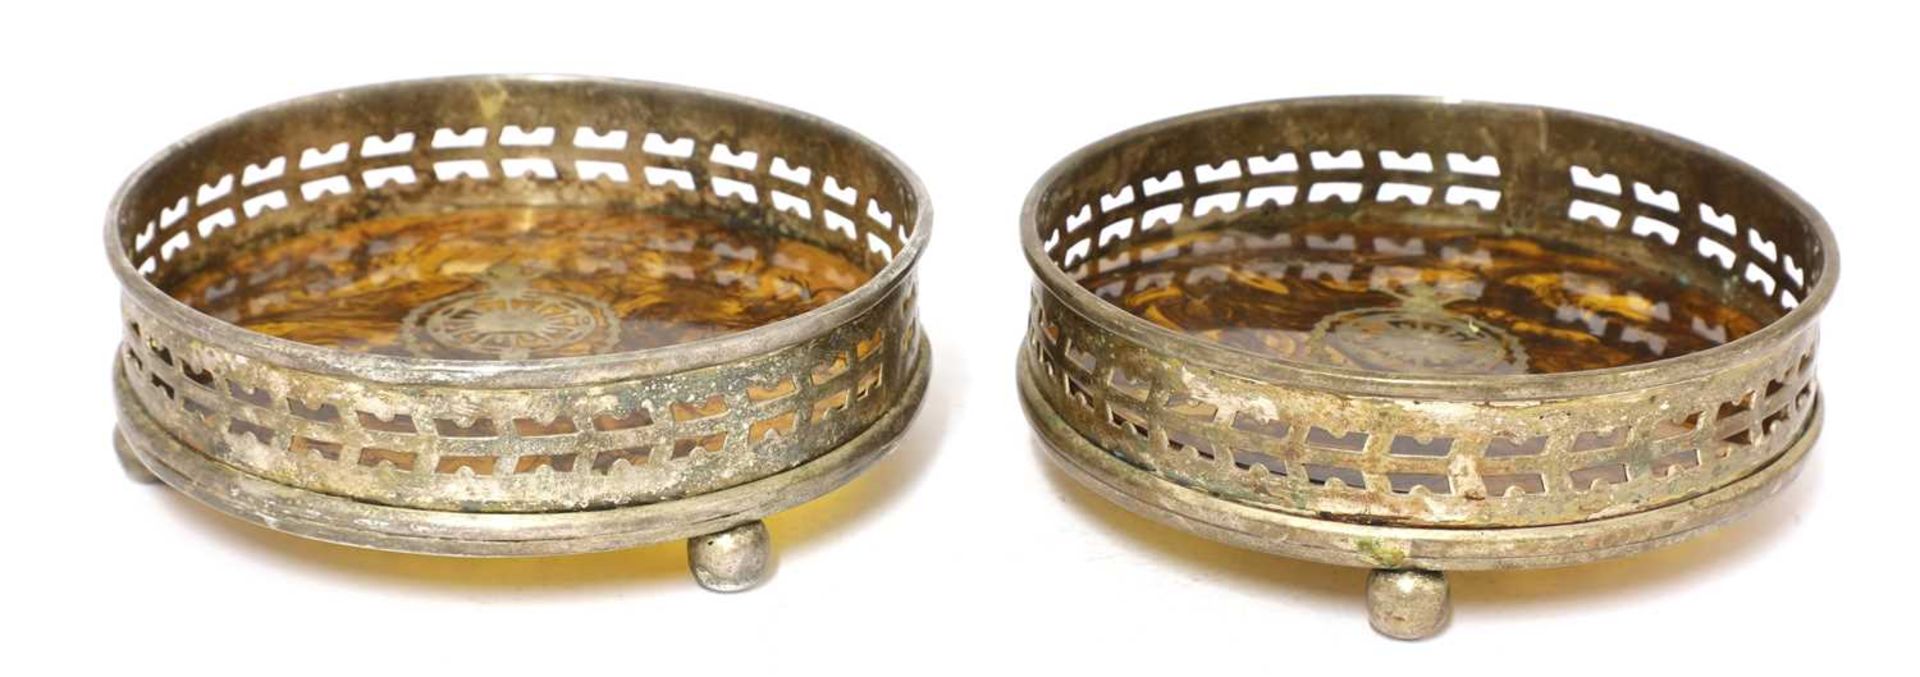 A pair of silver-plated coasters